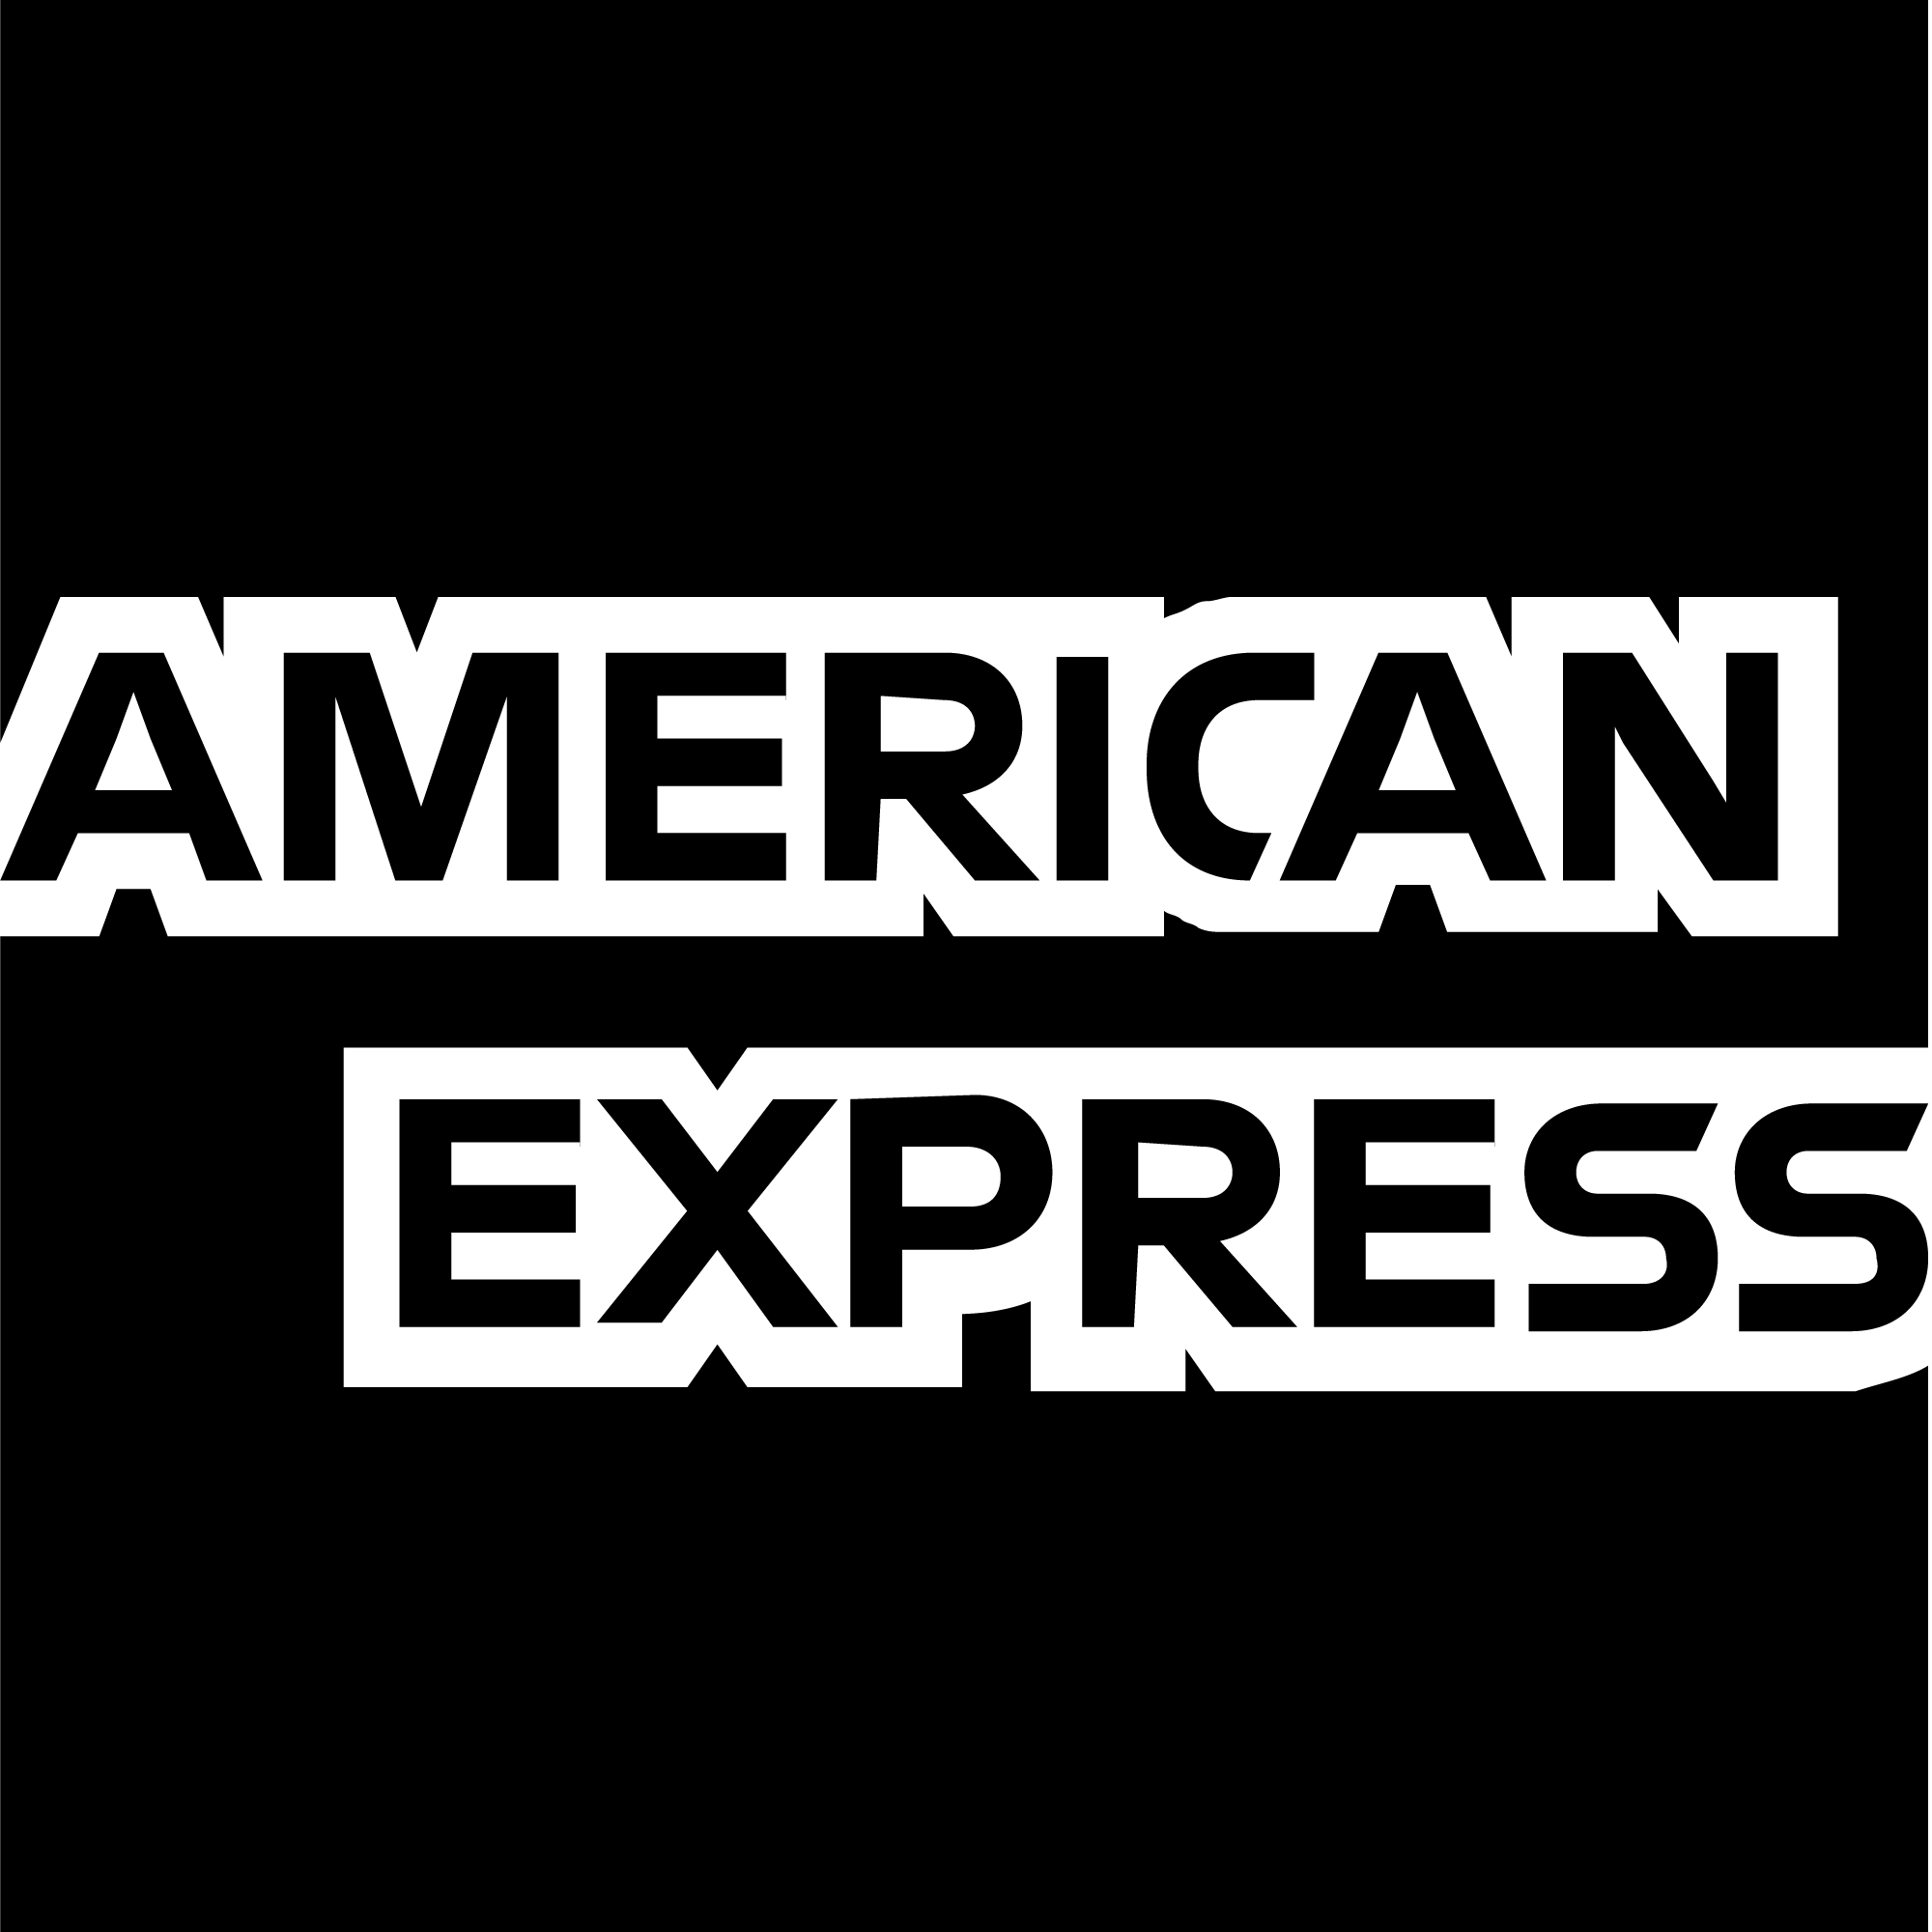 american express logo black and white